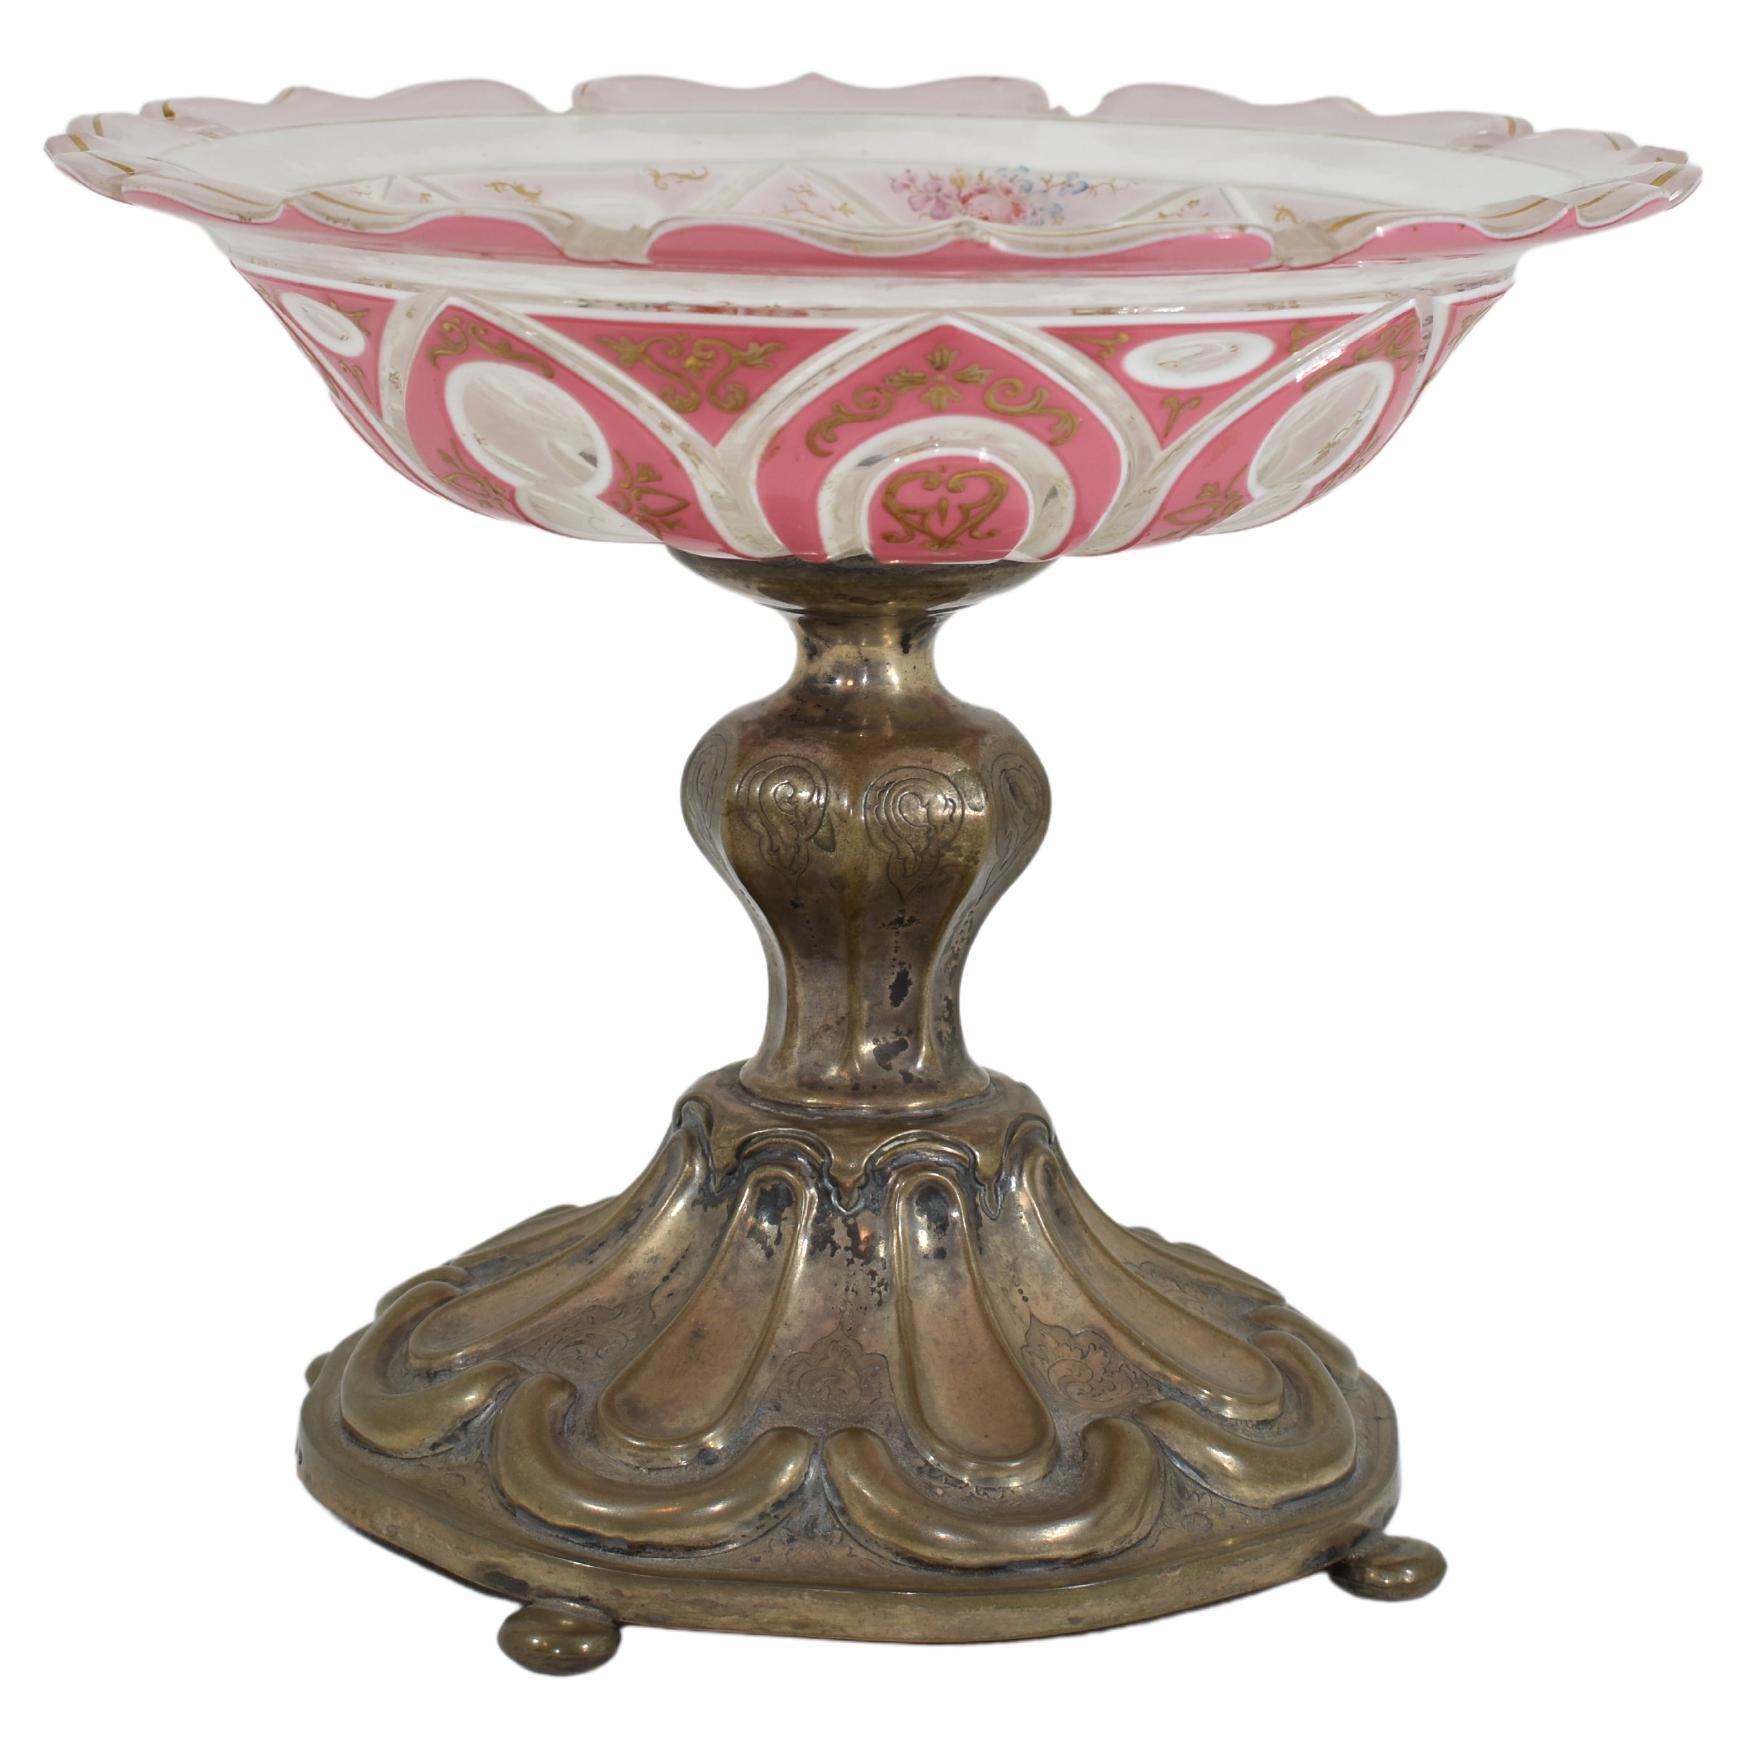 Antique tazza bowl with metal stand.
Double overlay, transparent glass overlaid with two layers of opaline glass
the pink layer is decorated with gilded enamel scrollworks
further enamel decoration on the inside of the bowl.
19th Century.